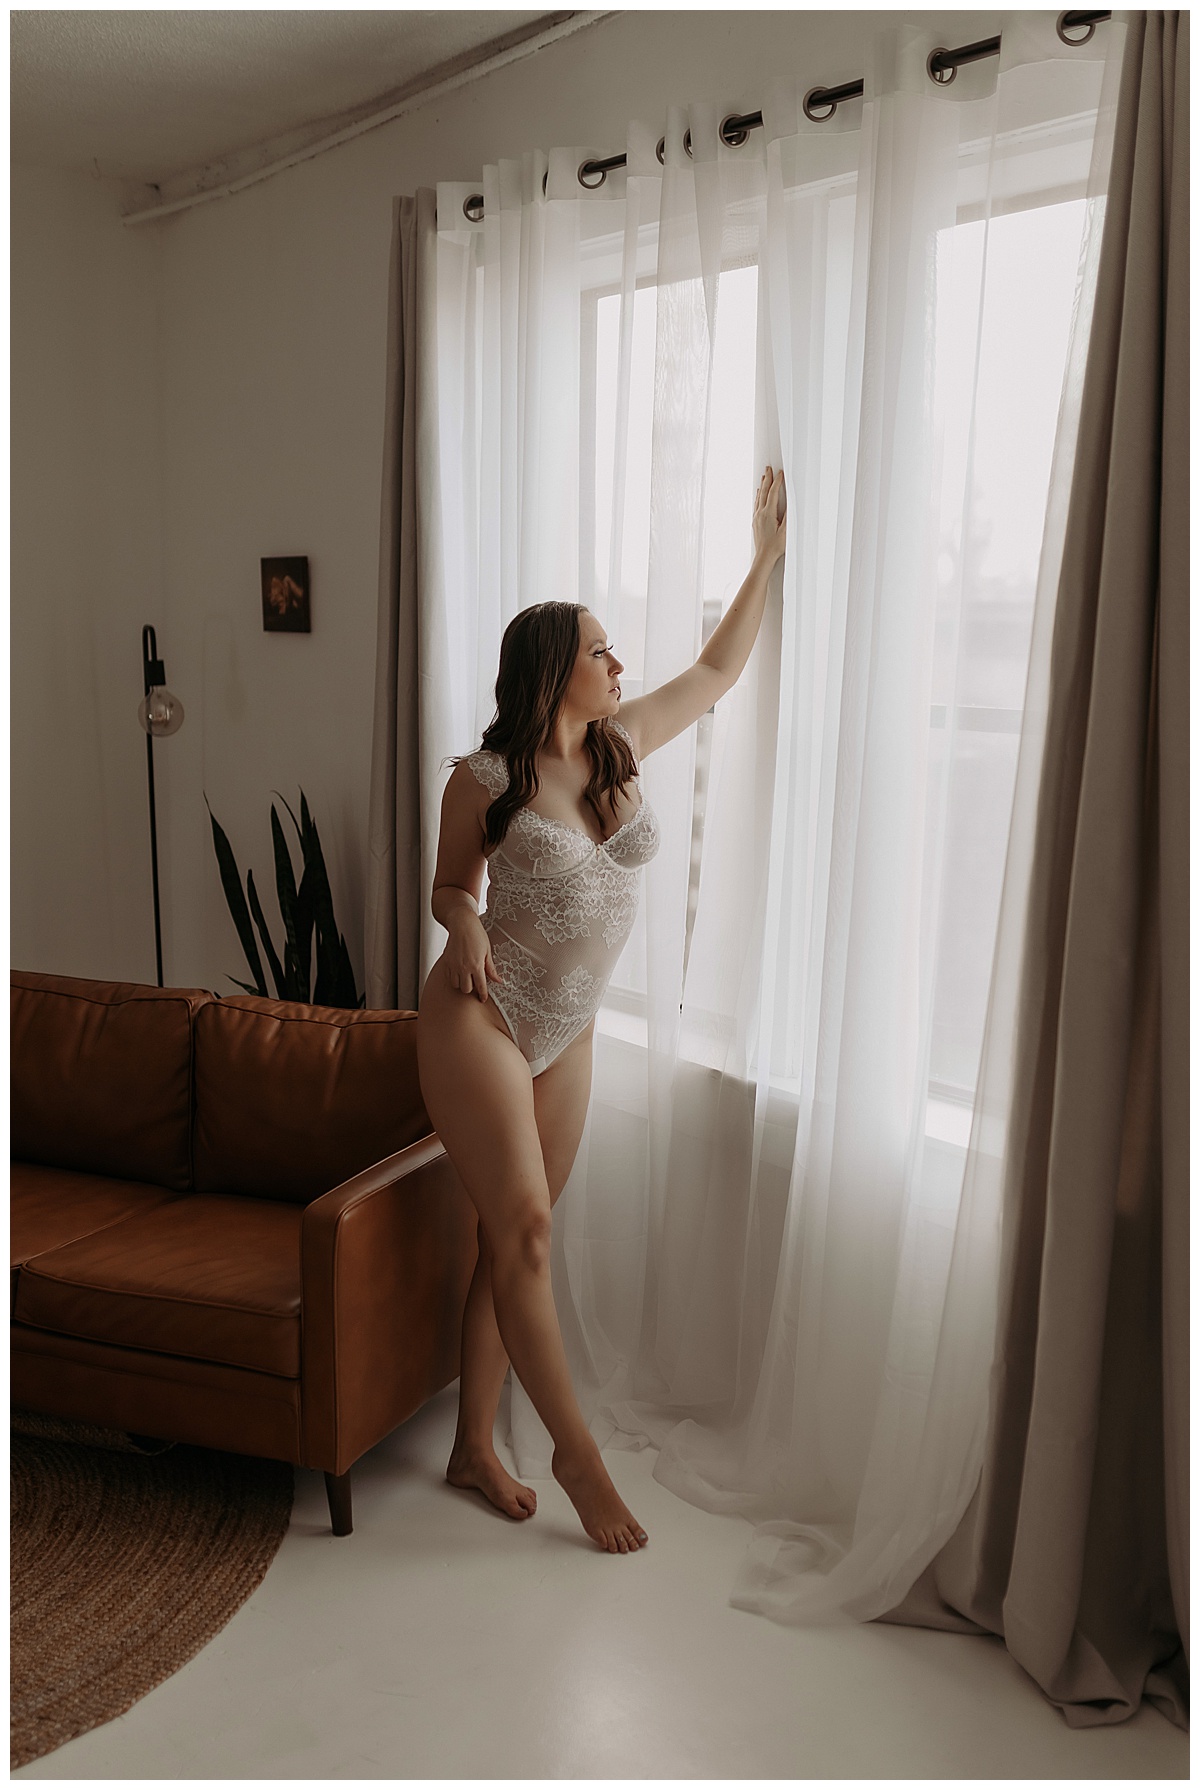 Woman stands in front of a window wearing white lingerie showing the benefits of doing More Than One Boudoir Session